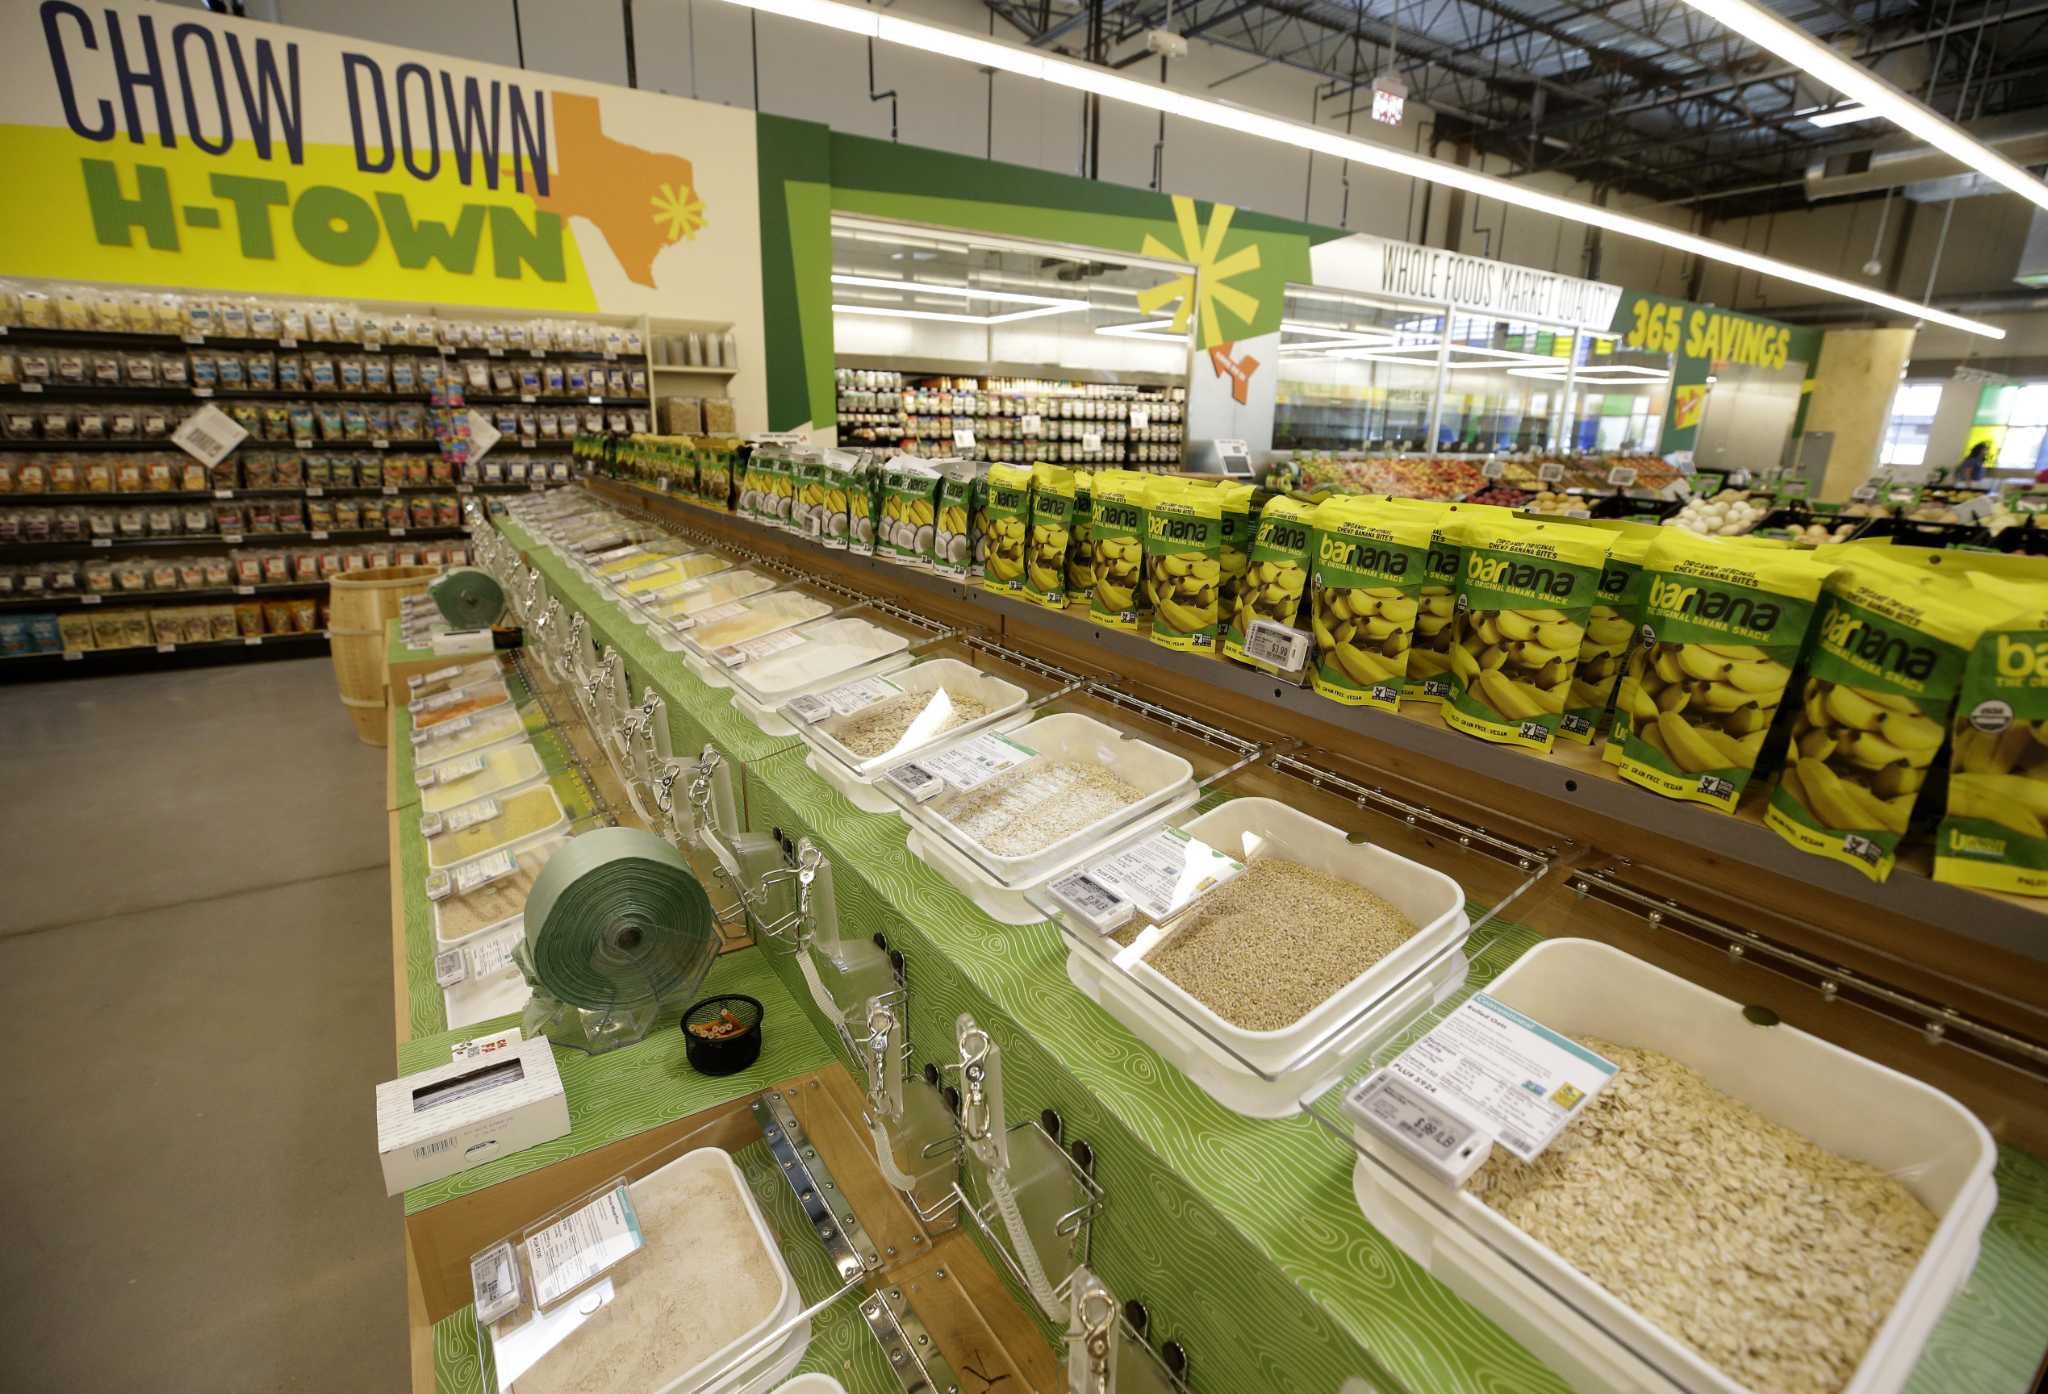 Outer Aisle heads nationwide with Whole Foods, debuting new packaging and  products